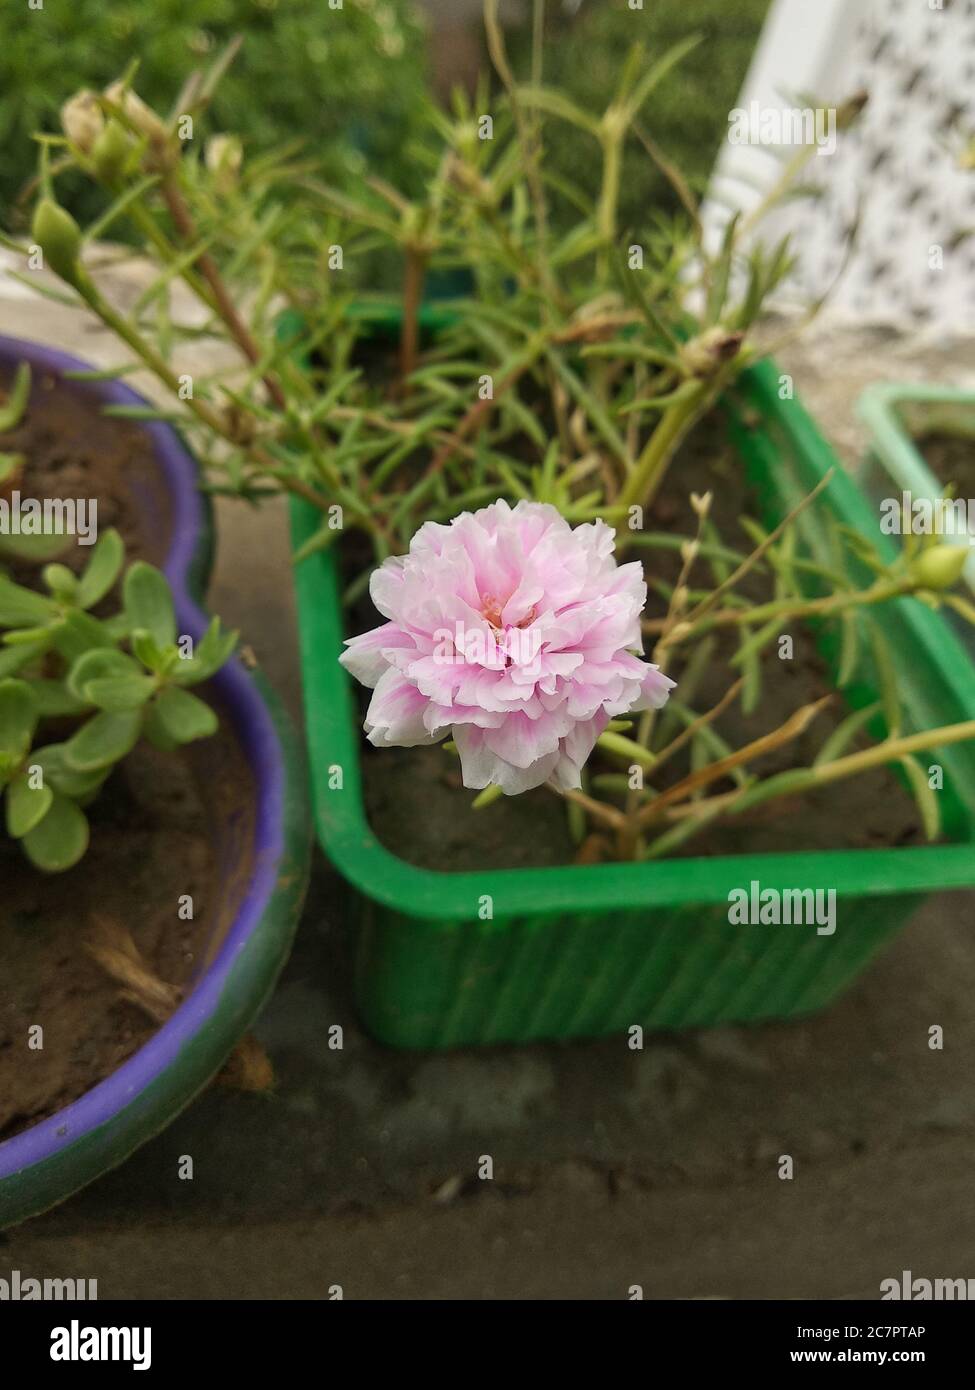 Portulaca grandiflora or Moss Rose or Sun plant or Sun Rose. A colourful blossom, petals stacked overlapping in layers. Supported by tiny, thick & fle Stock Photo